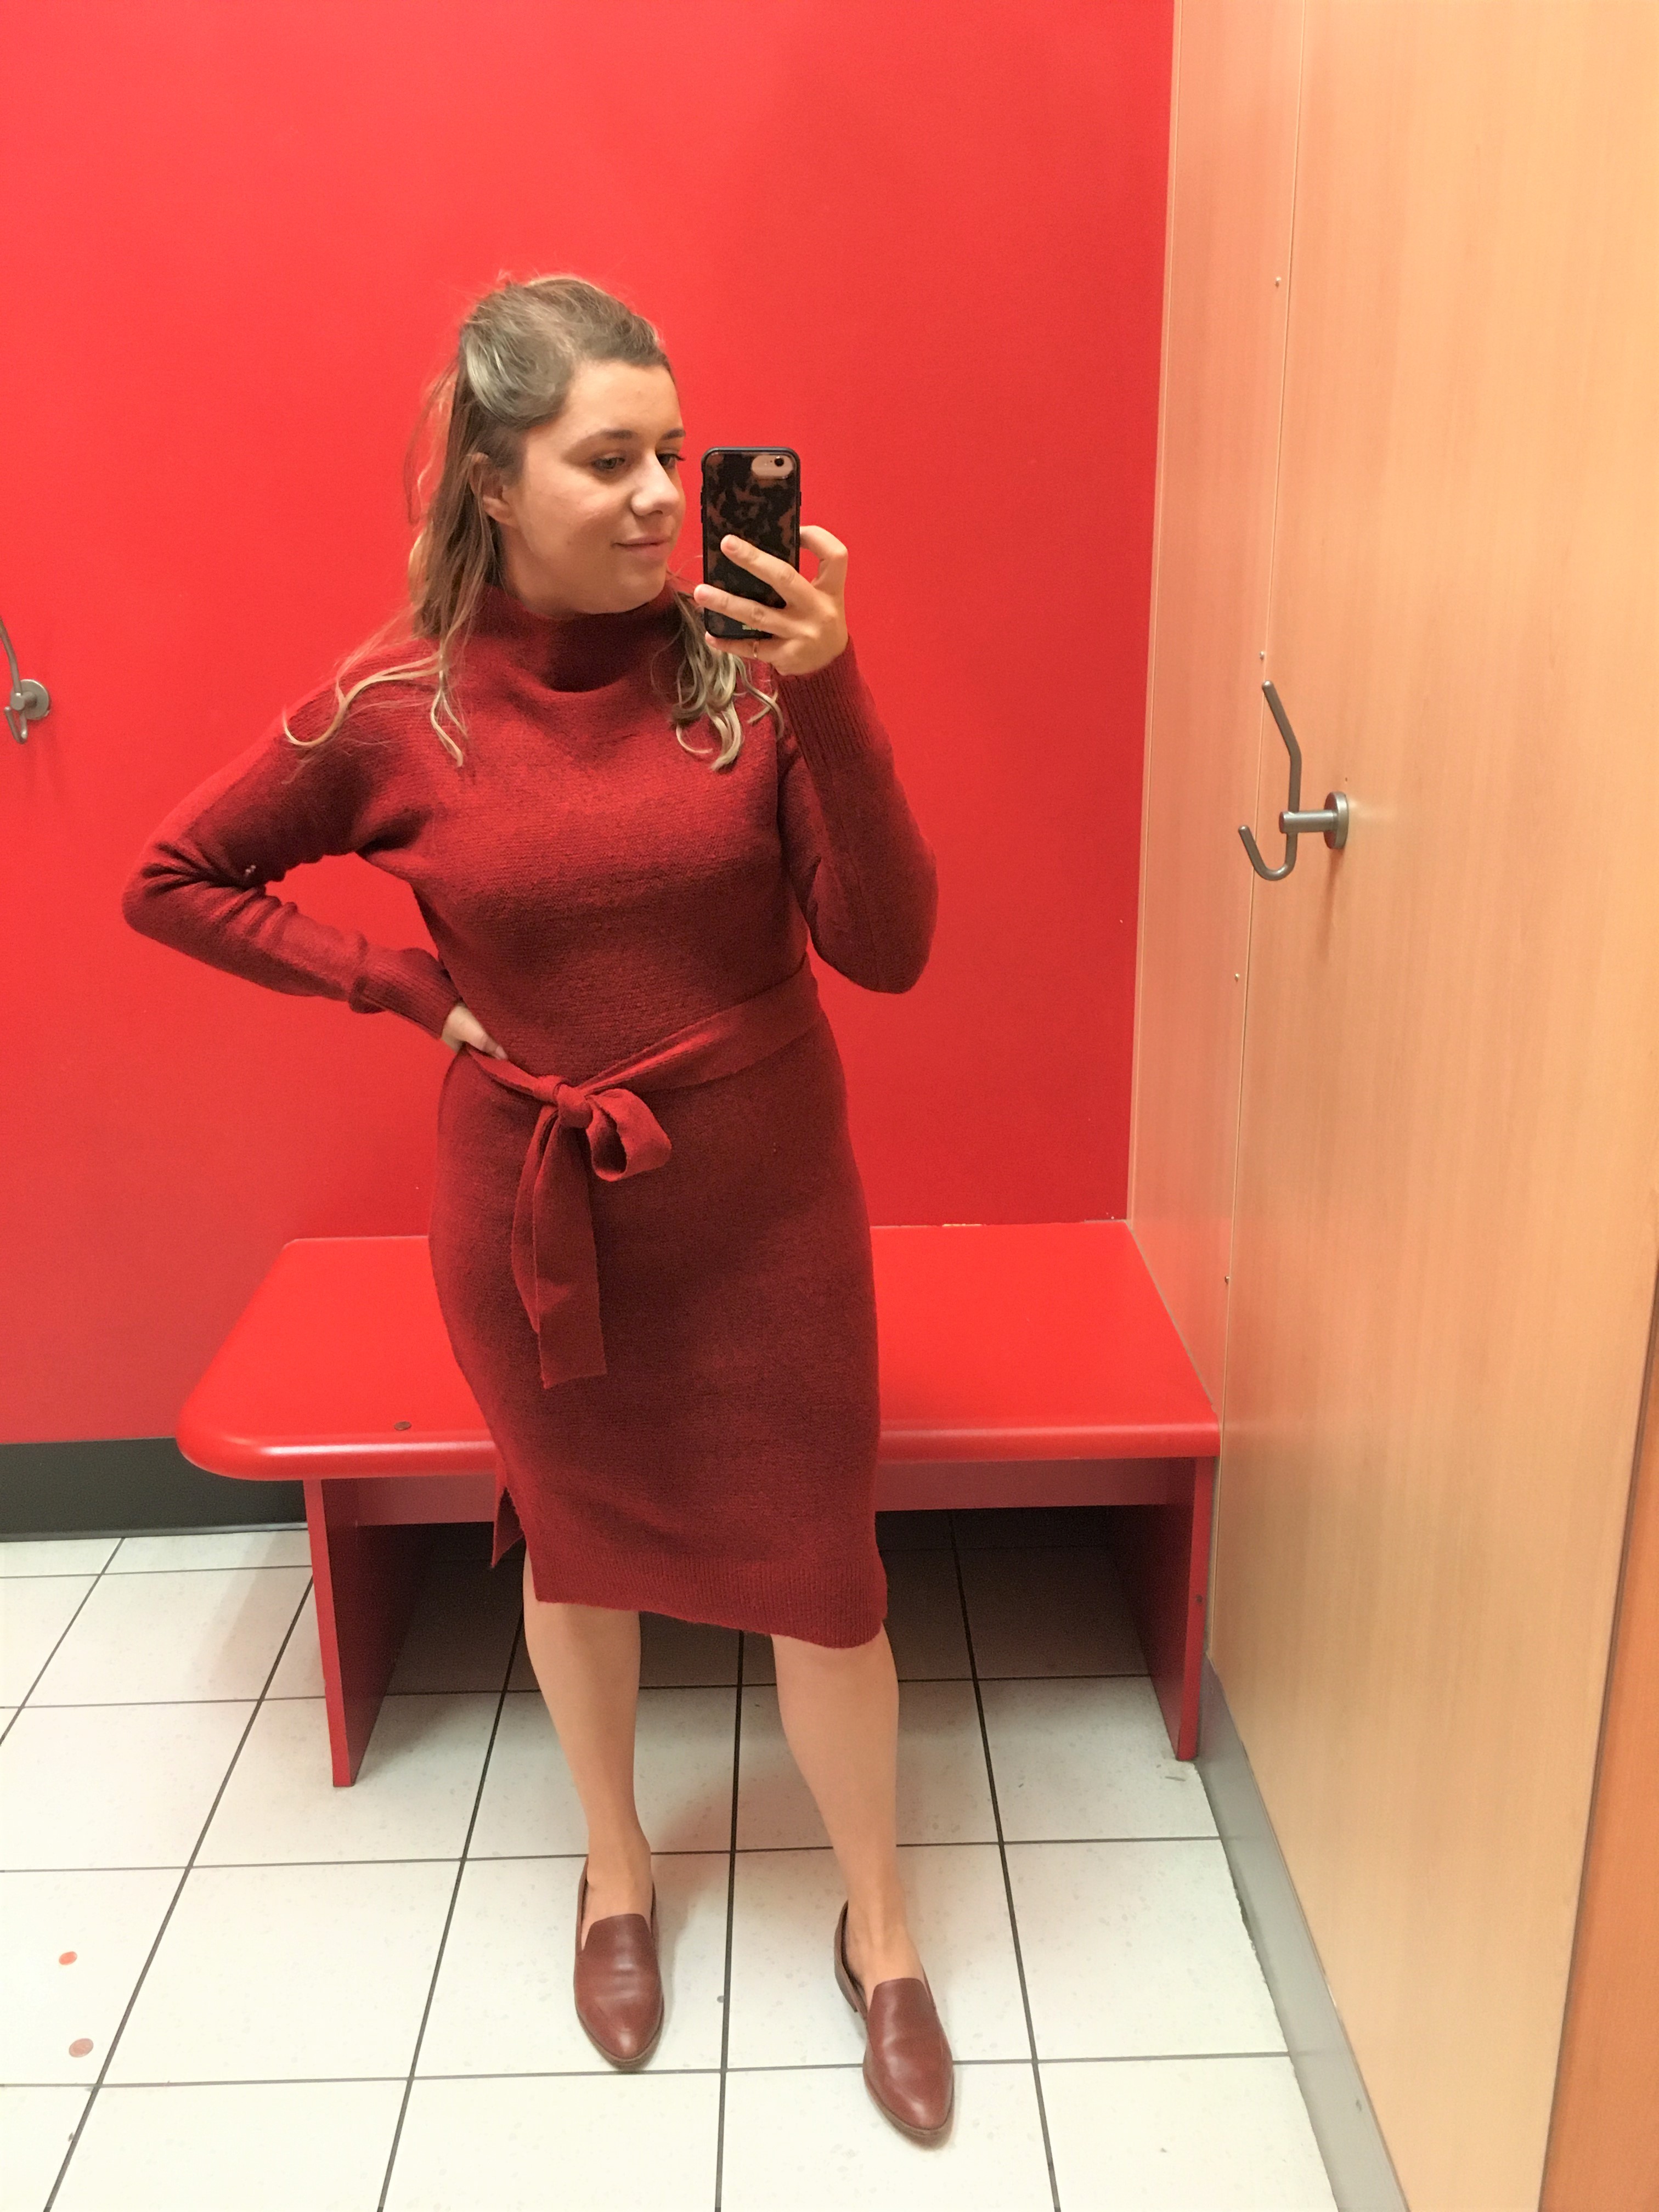 red sweater dress outfit